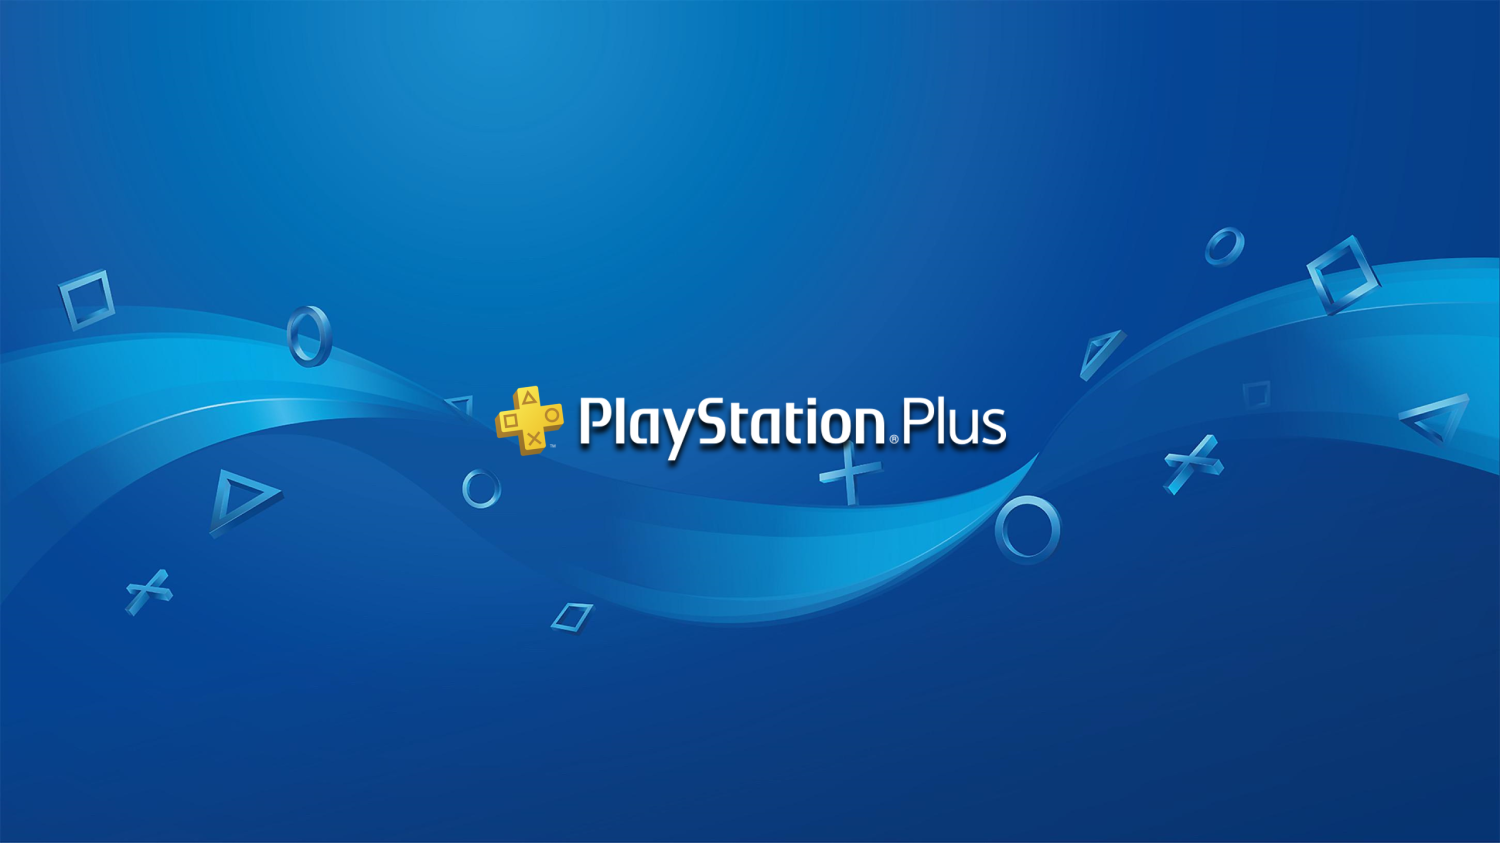 A year of PlayStation Plus is now just $36.79 - CNET